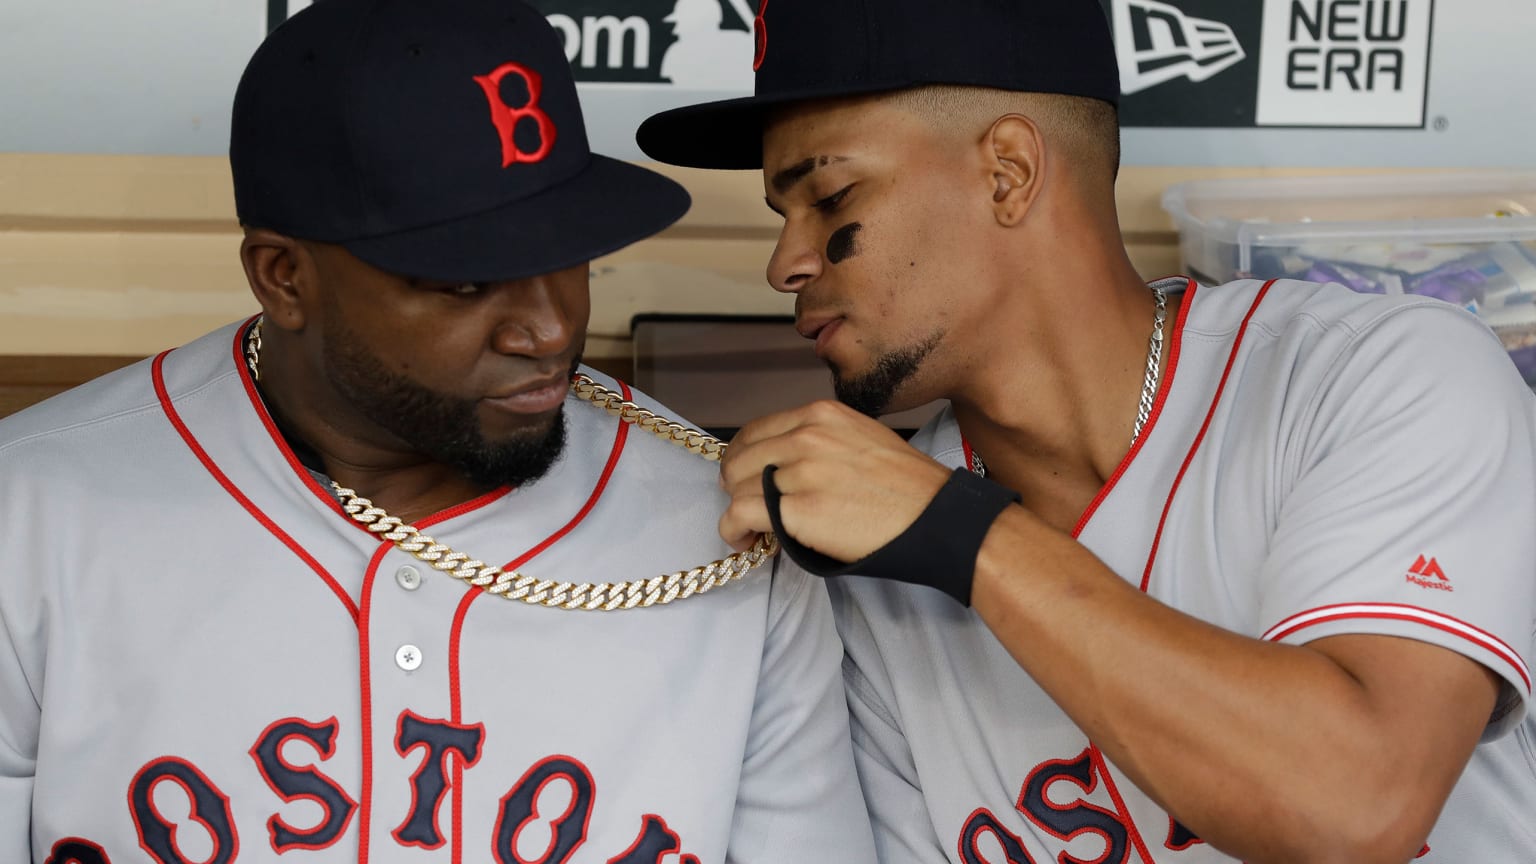 David Ortiz and Xander Bogaerts in the dugout as teammates